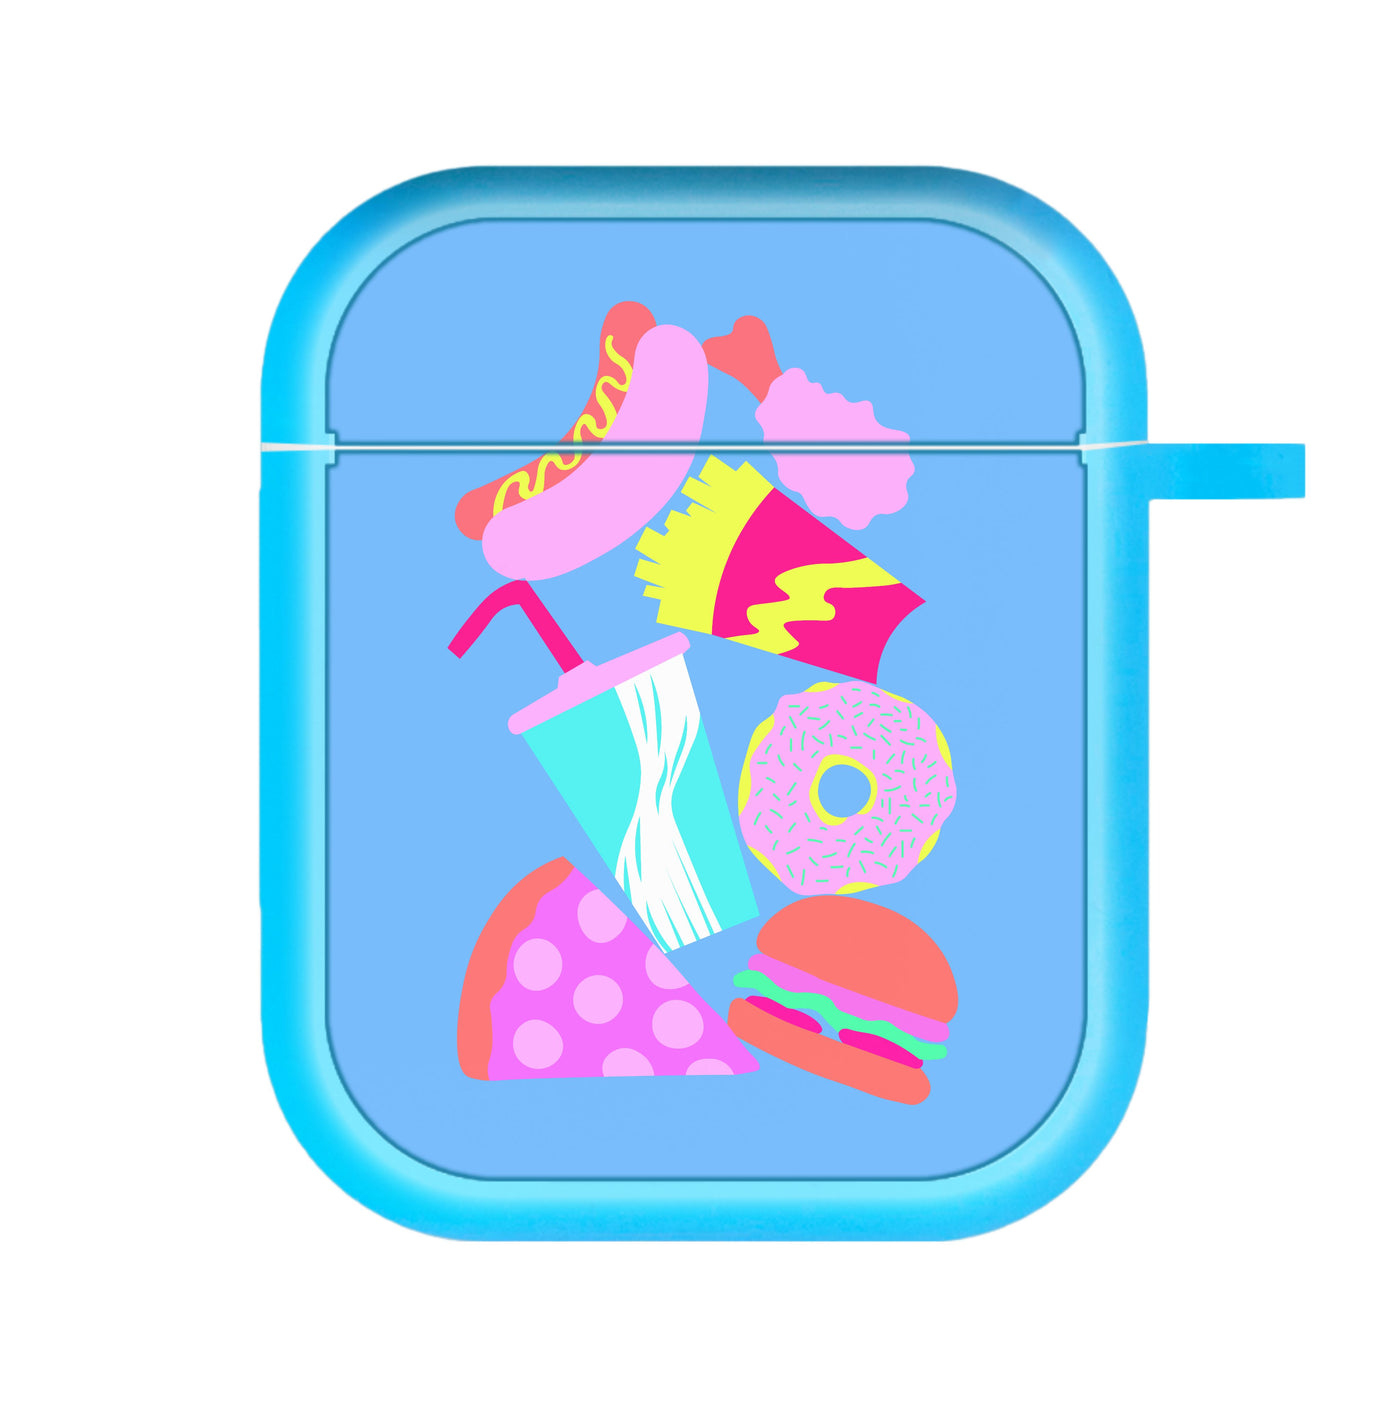 All The Foods - Fast Food Patterns AirPods Case